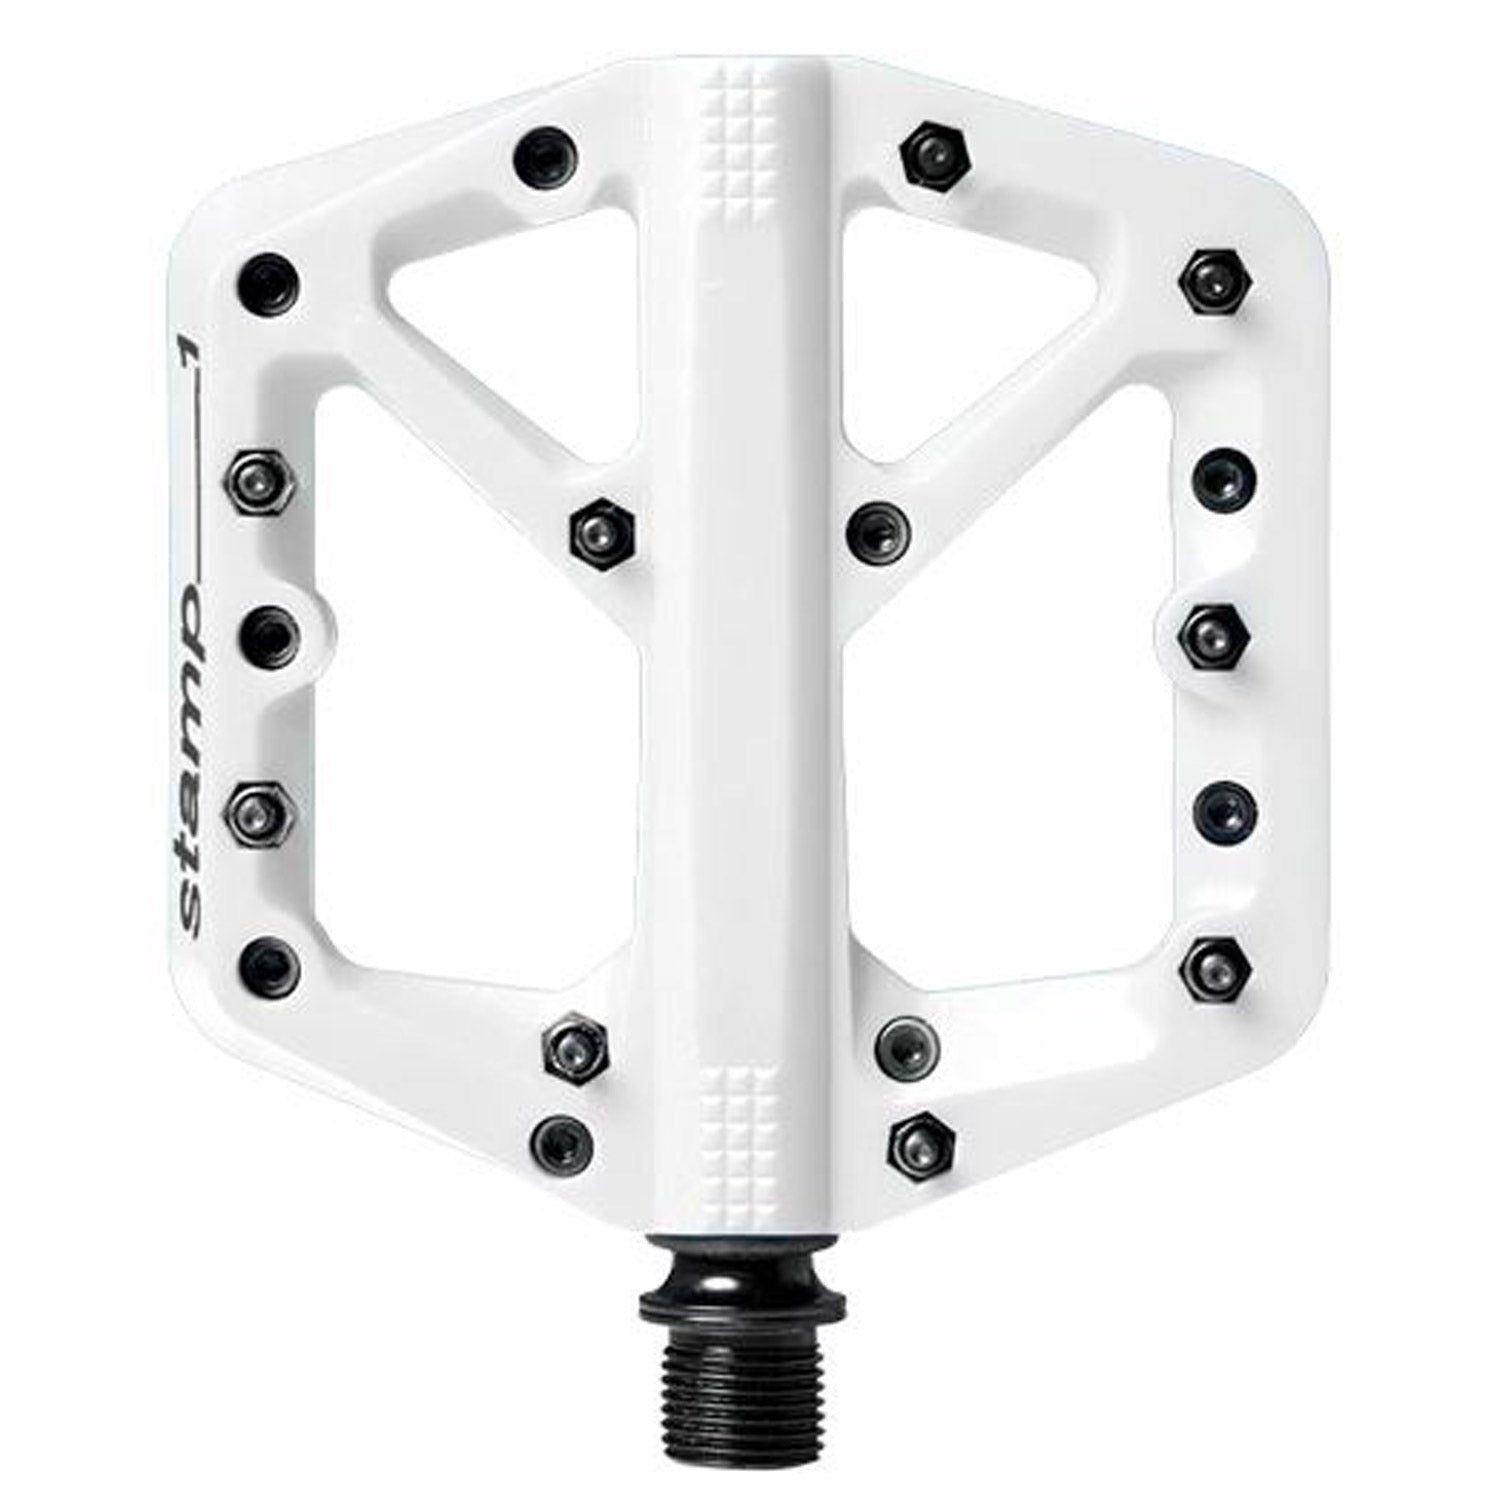 Crankbrothers' New Stamp 1 Pedal